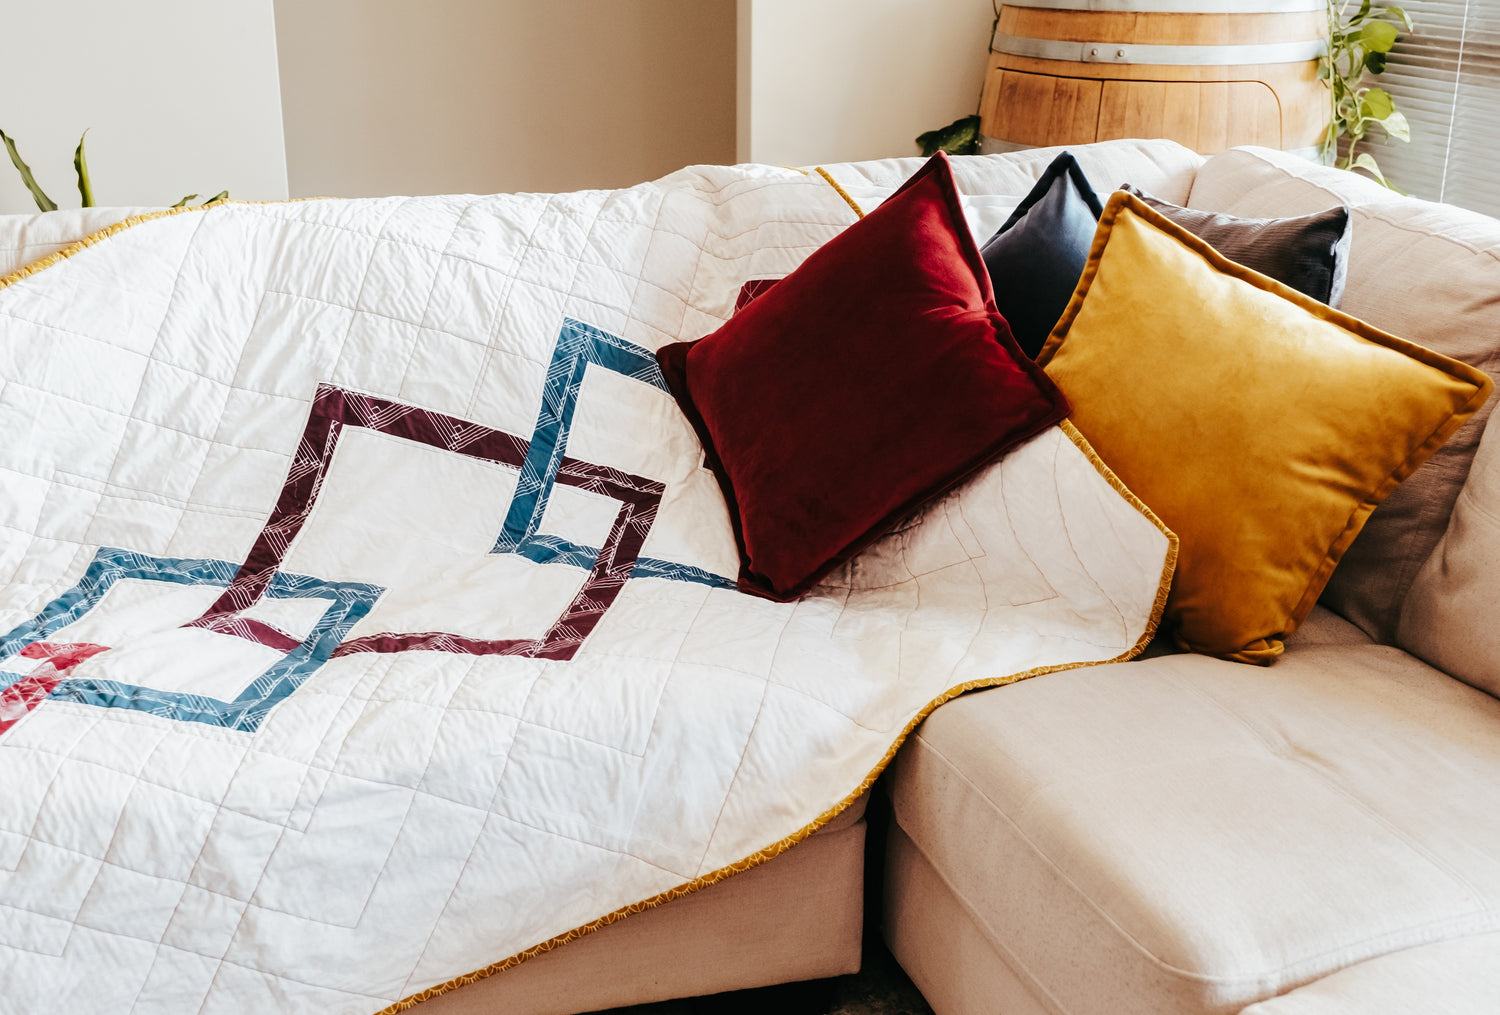 A handmade quilt is draped on a couch with matching colourful cushions